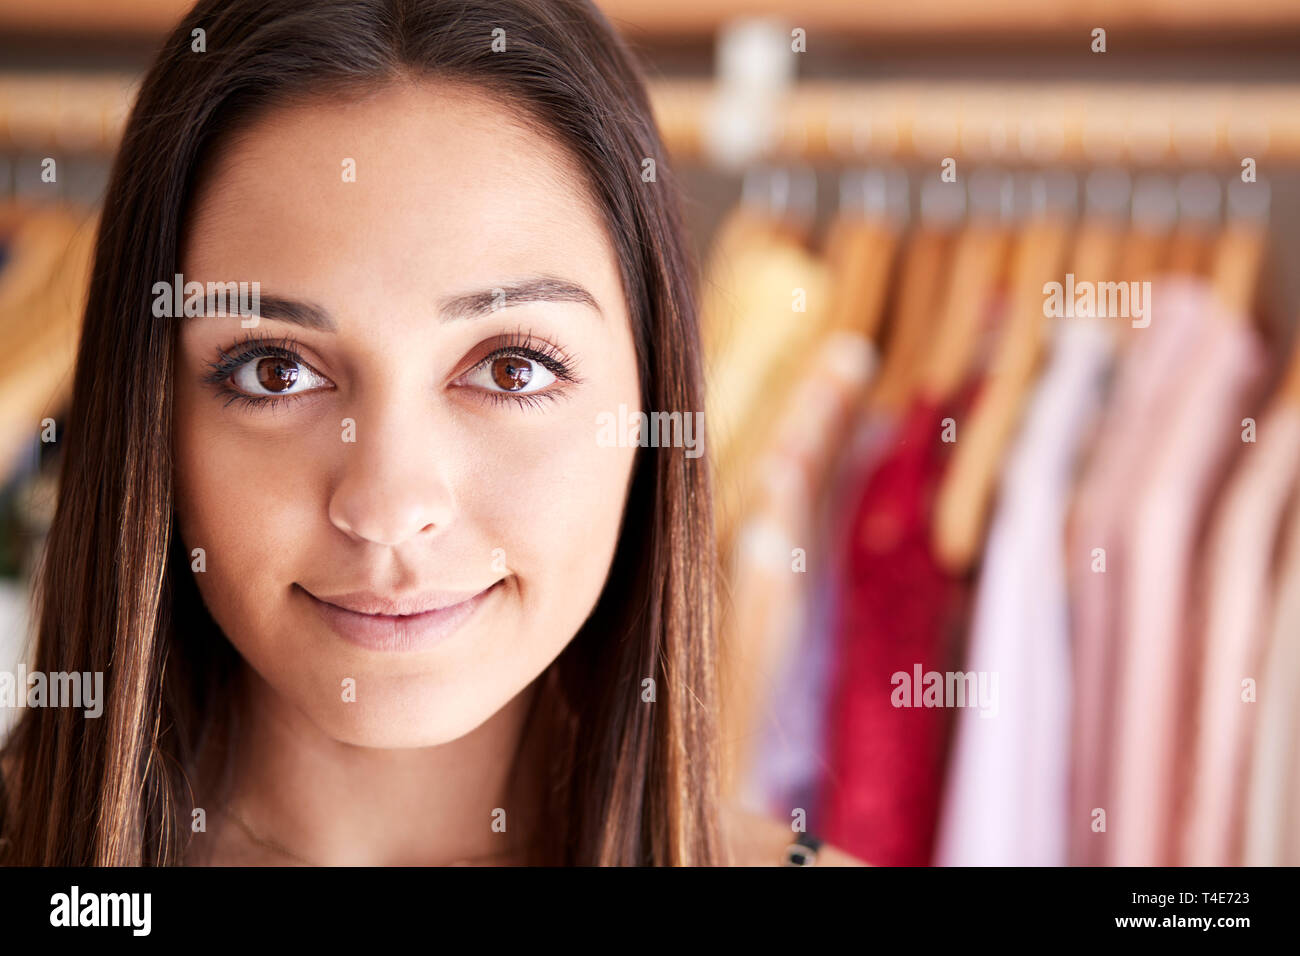 Portrait Of Female Customer Or Owner Standing By Racks Of Clothes In Independent Fashion Store Stock Photo